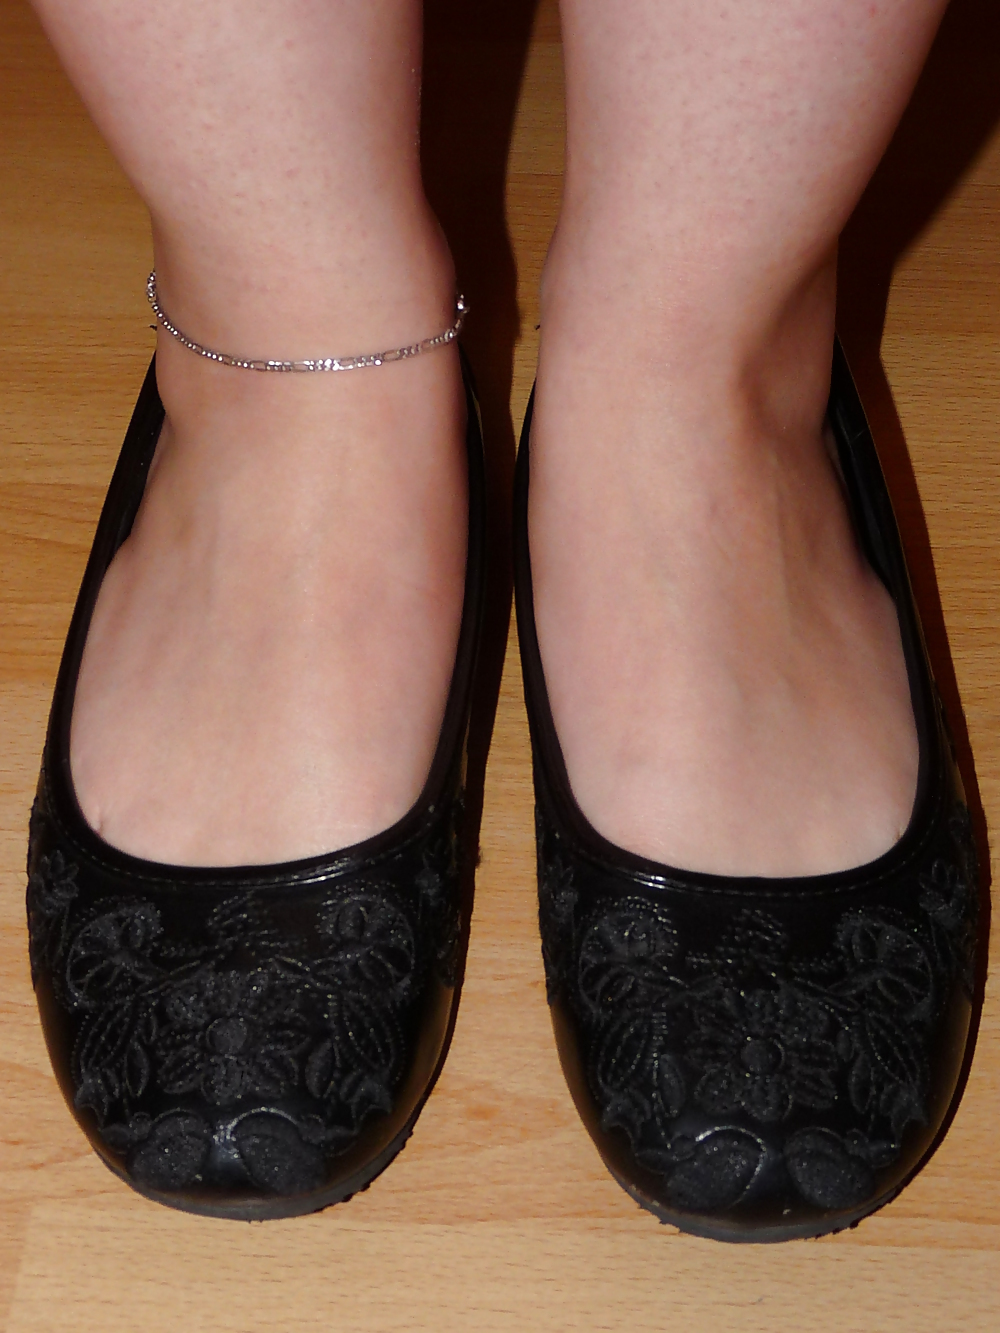 Wifes sexy black leather ballerina ballet flats shoes 2 #19330310